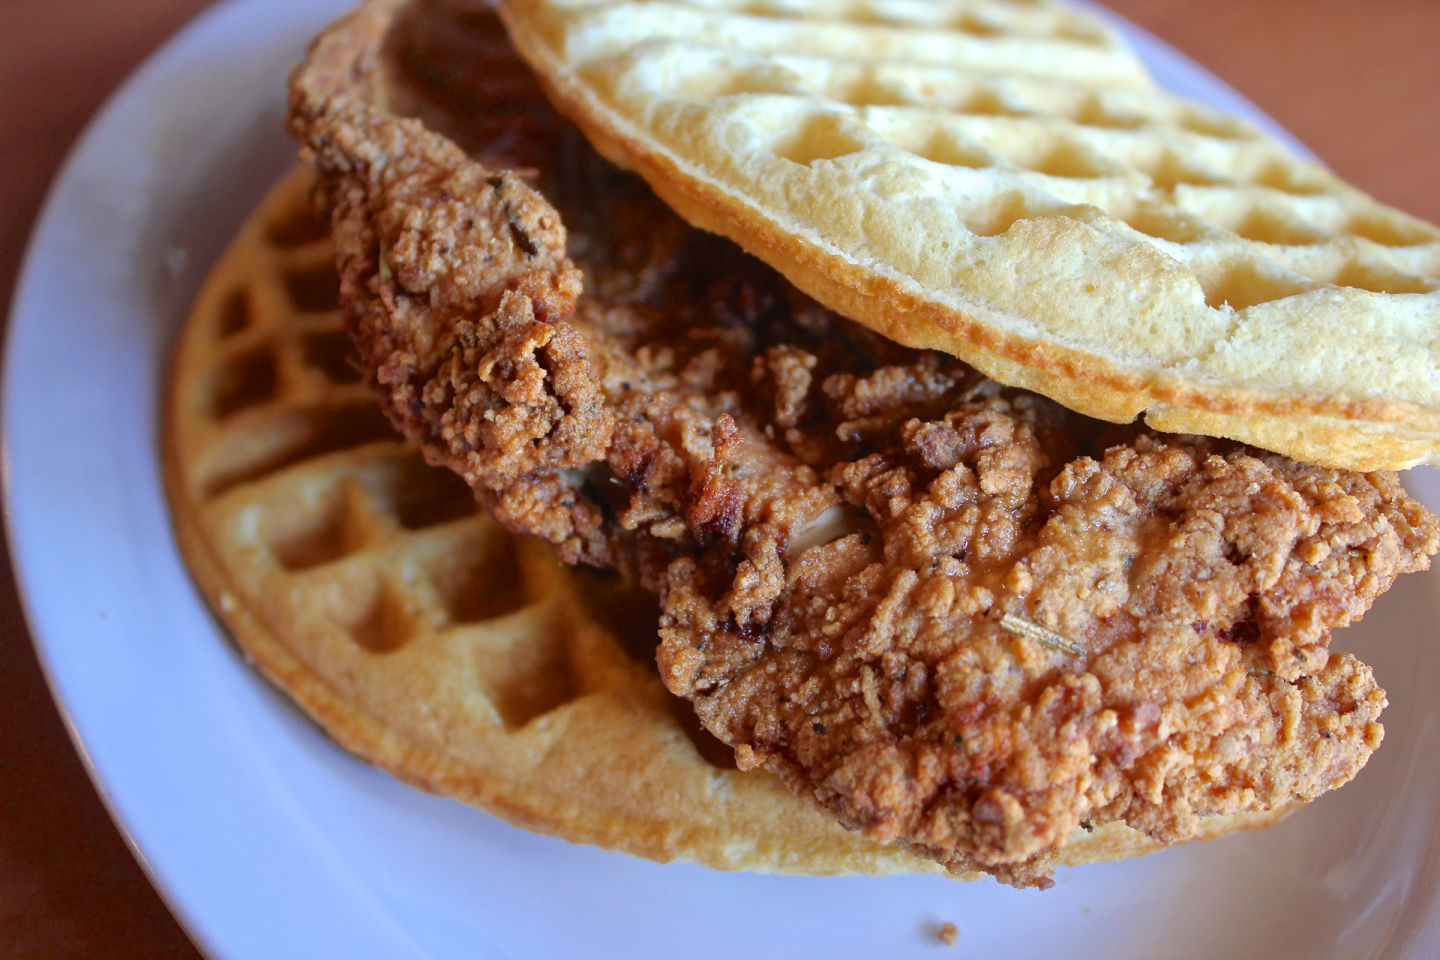 The Chicken ‘N Waffle at Butter & Zeus.  Jeff Cianci